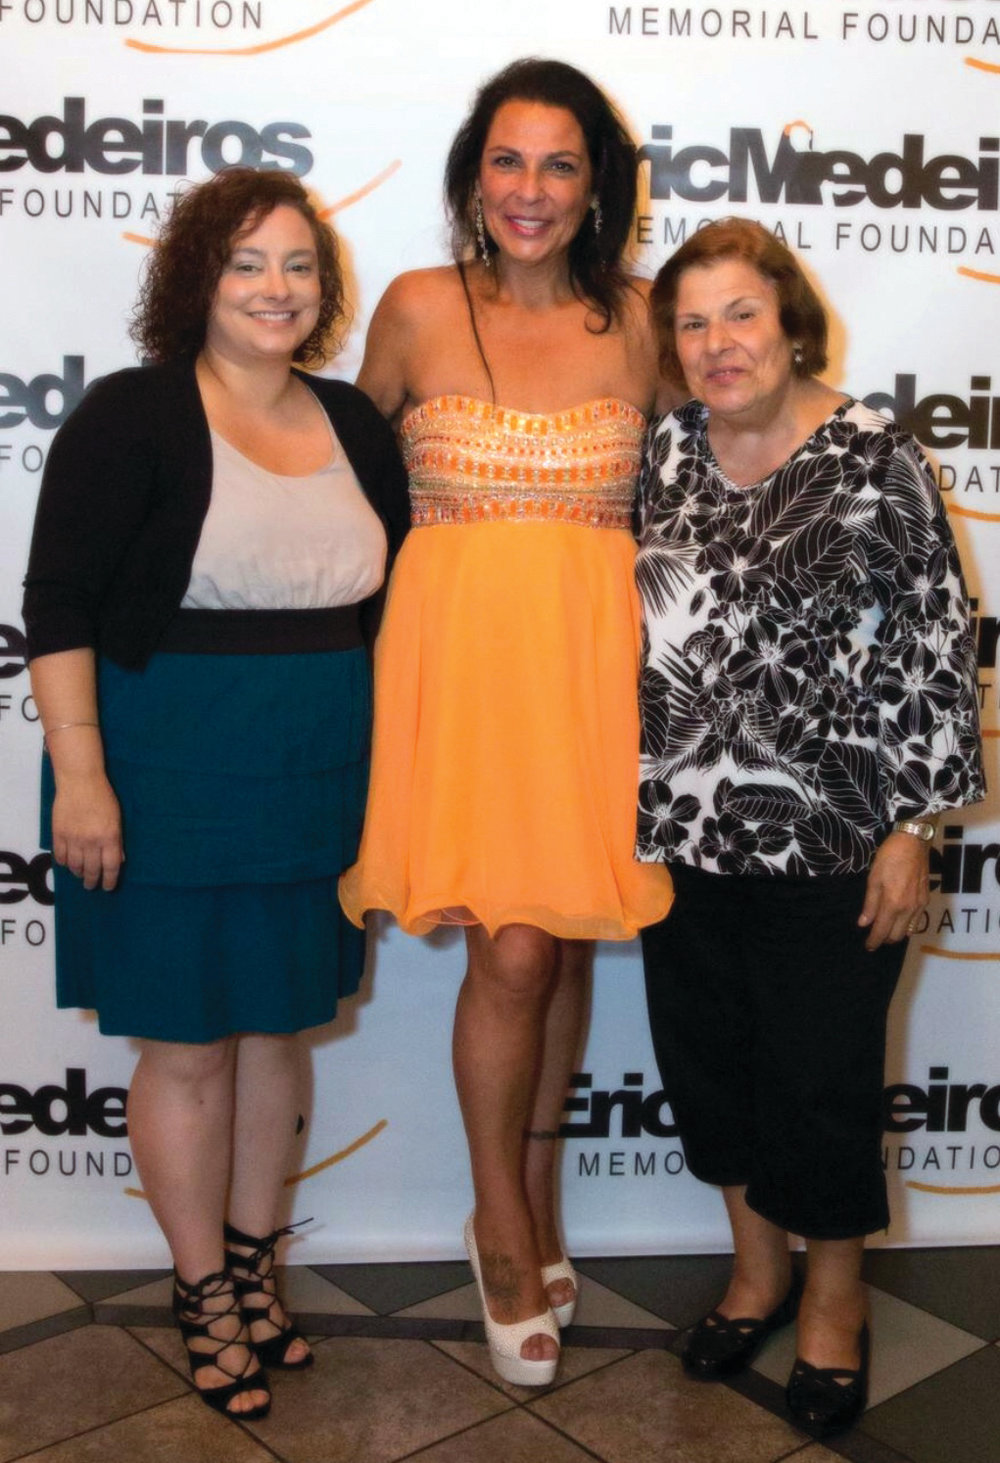 DOING GOOD: Anna Casador shares a moment with her daughter Jessica, left, and mother Esmeralda, right. The third annual Eric Medeiros Memorial Foundation Fundraising Gala will be held Sept. 3 at Spain Restaurant in Cranston.